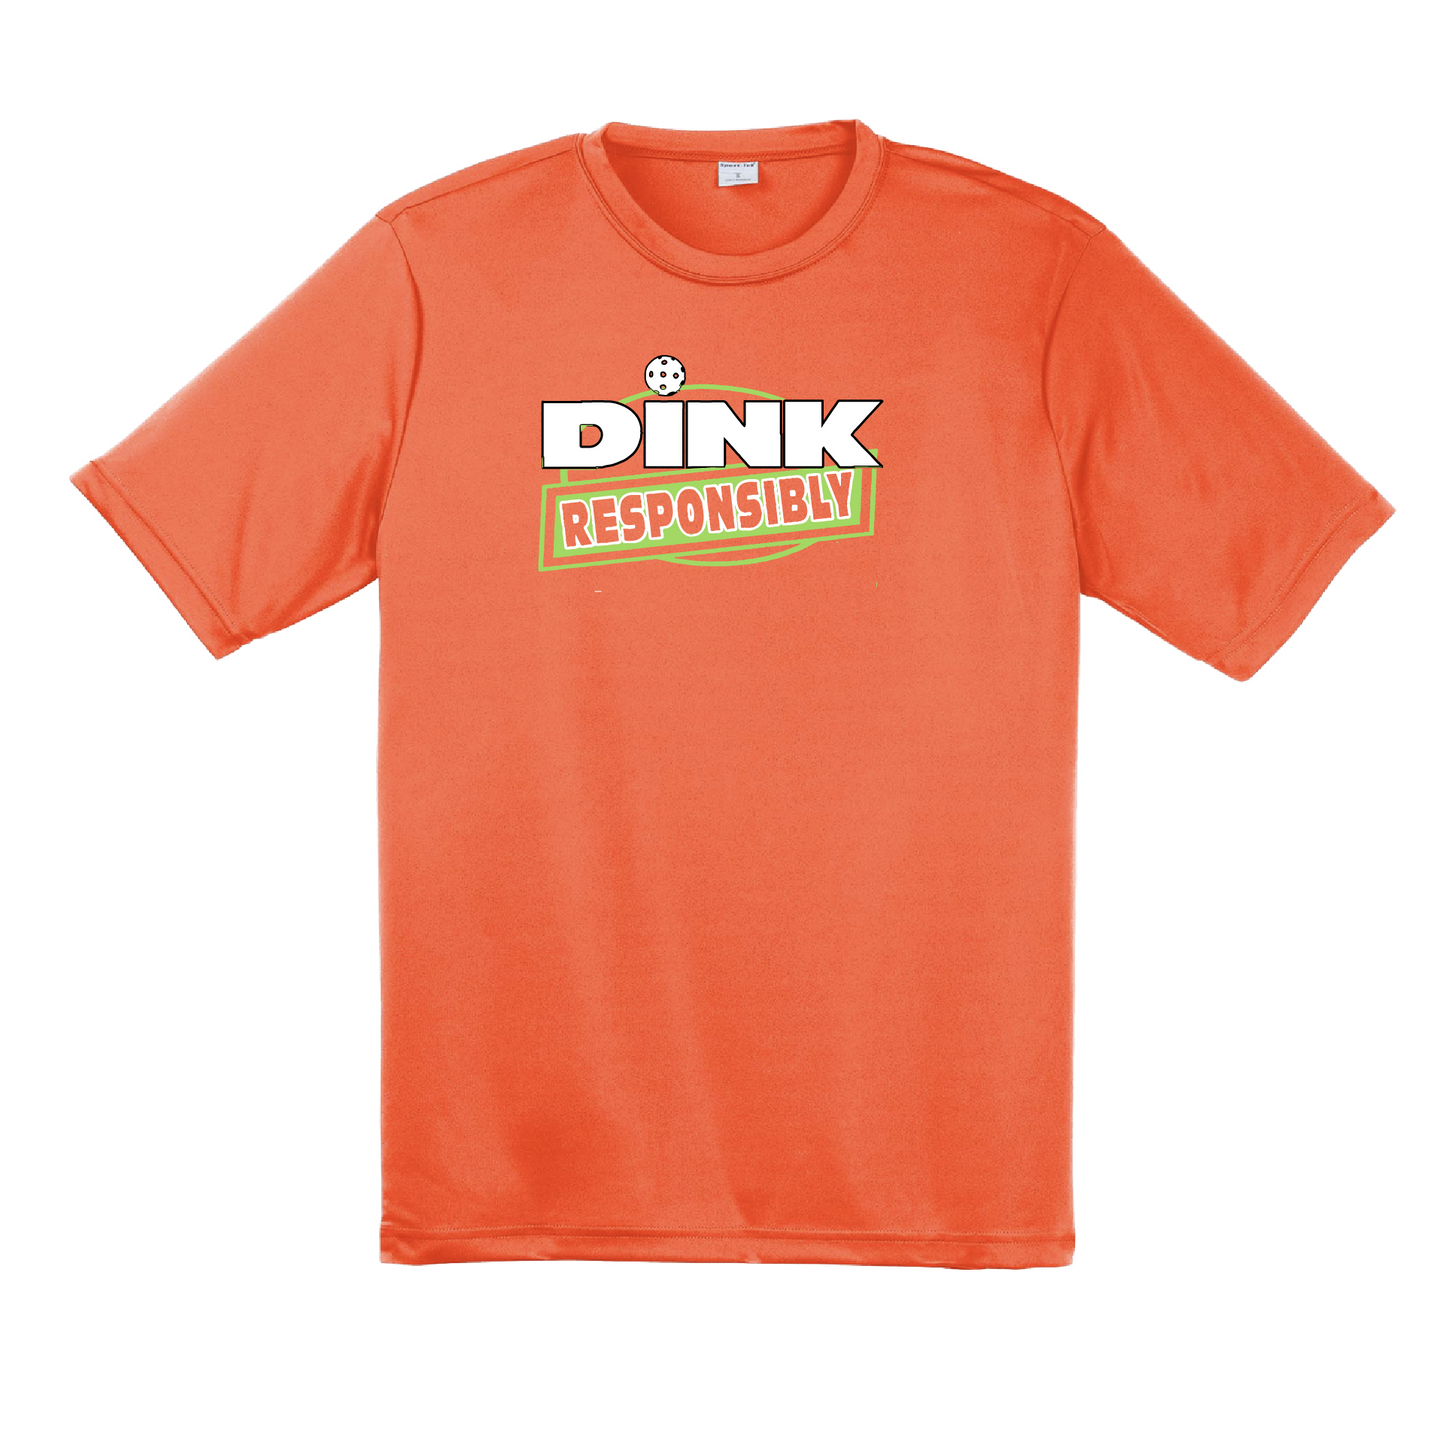 Pickleball Design: Dink Responsibly  Men's Style: Short Sleeved   Shirts are lightweight, roomy and highly breathable. These moisture-wicking shirts are designed for athletic performance. They feature PosiCharge technology to lock in color and prevent logos from fading. Removable tag and set-in sleeves for comfort.